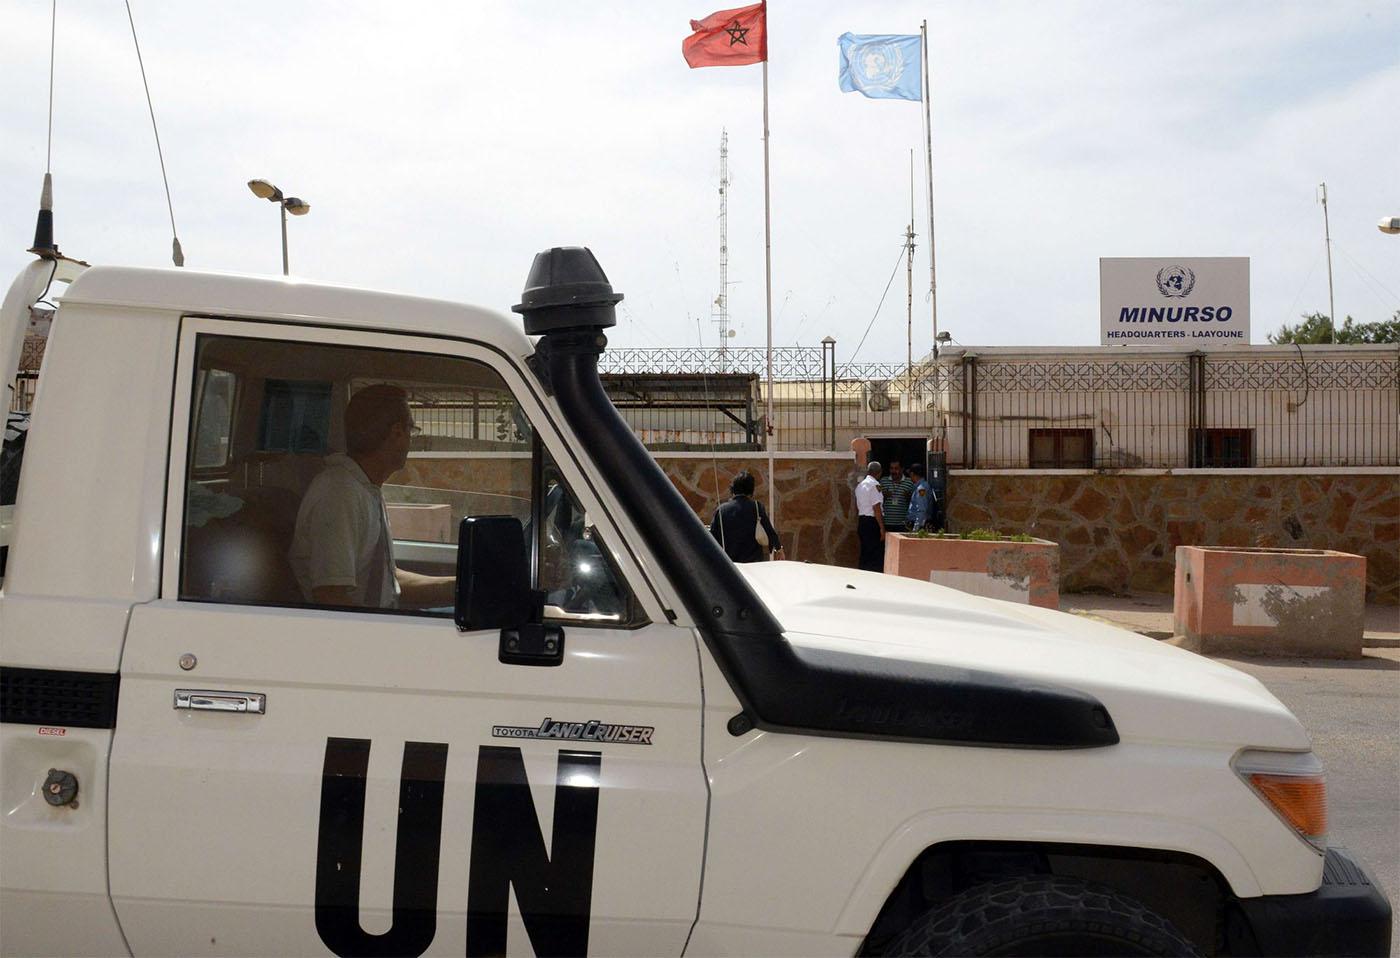 The headquarters of the United Nations Mission for the Referendum in Western Sahara (MINURSO) in Laayoune